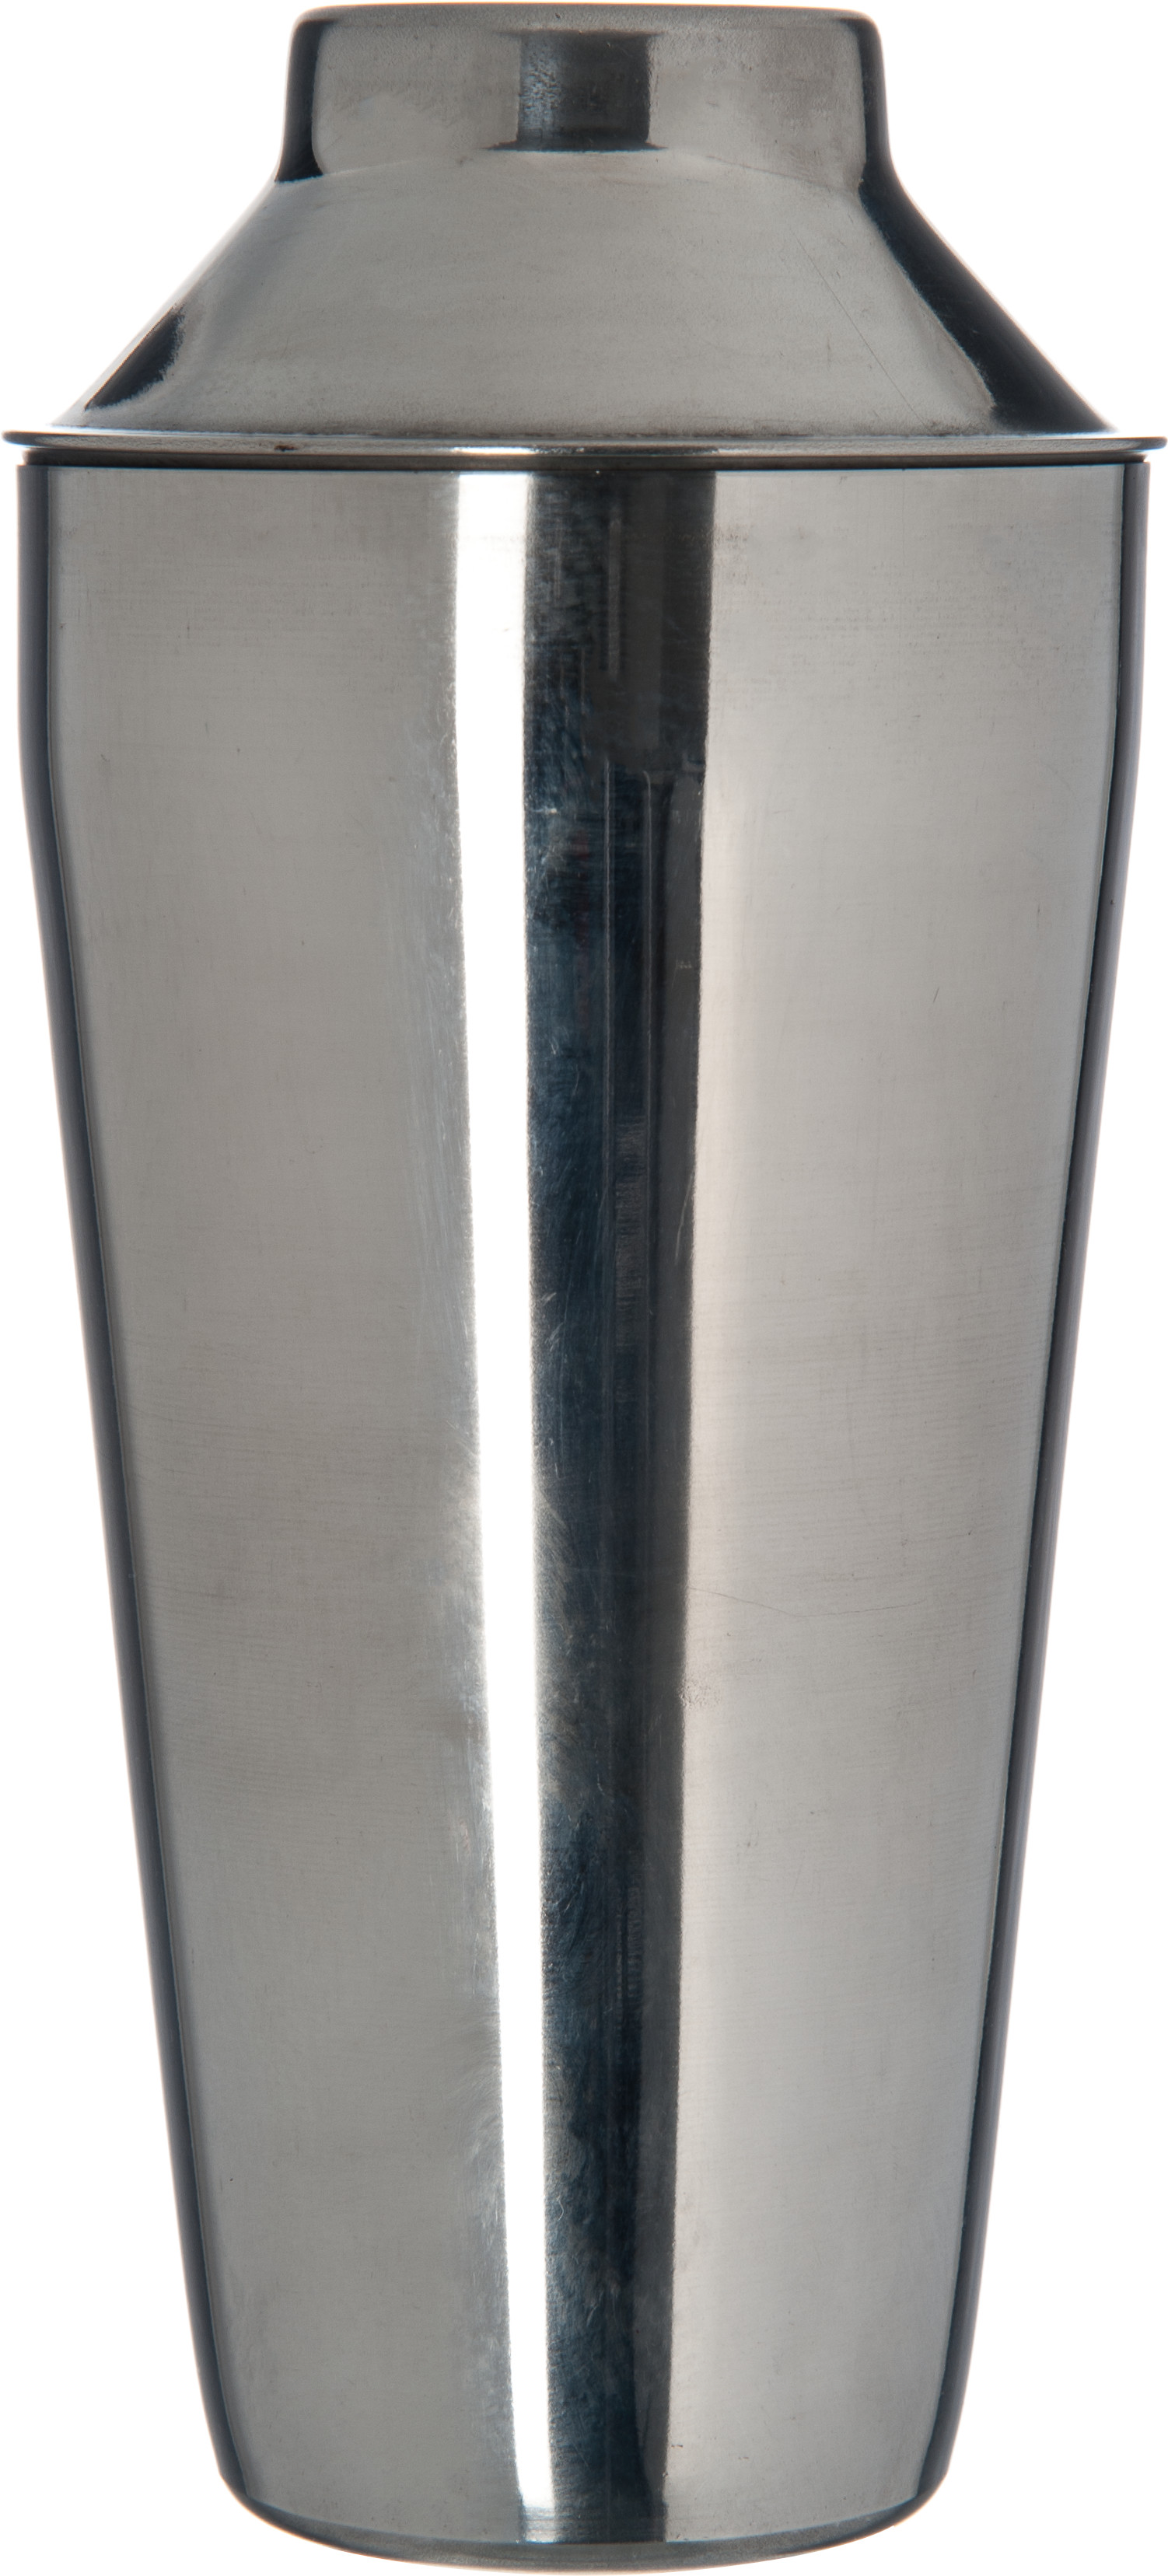 Cone Shaped Glass Vase Replacement Of Enriched Product Listing Pertaining to 266460